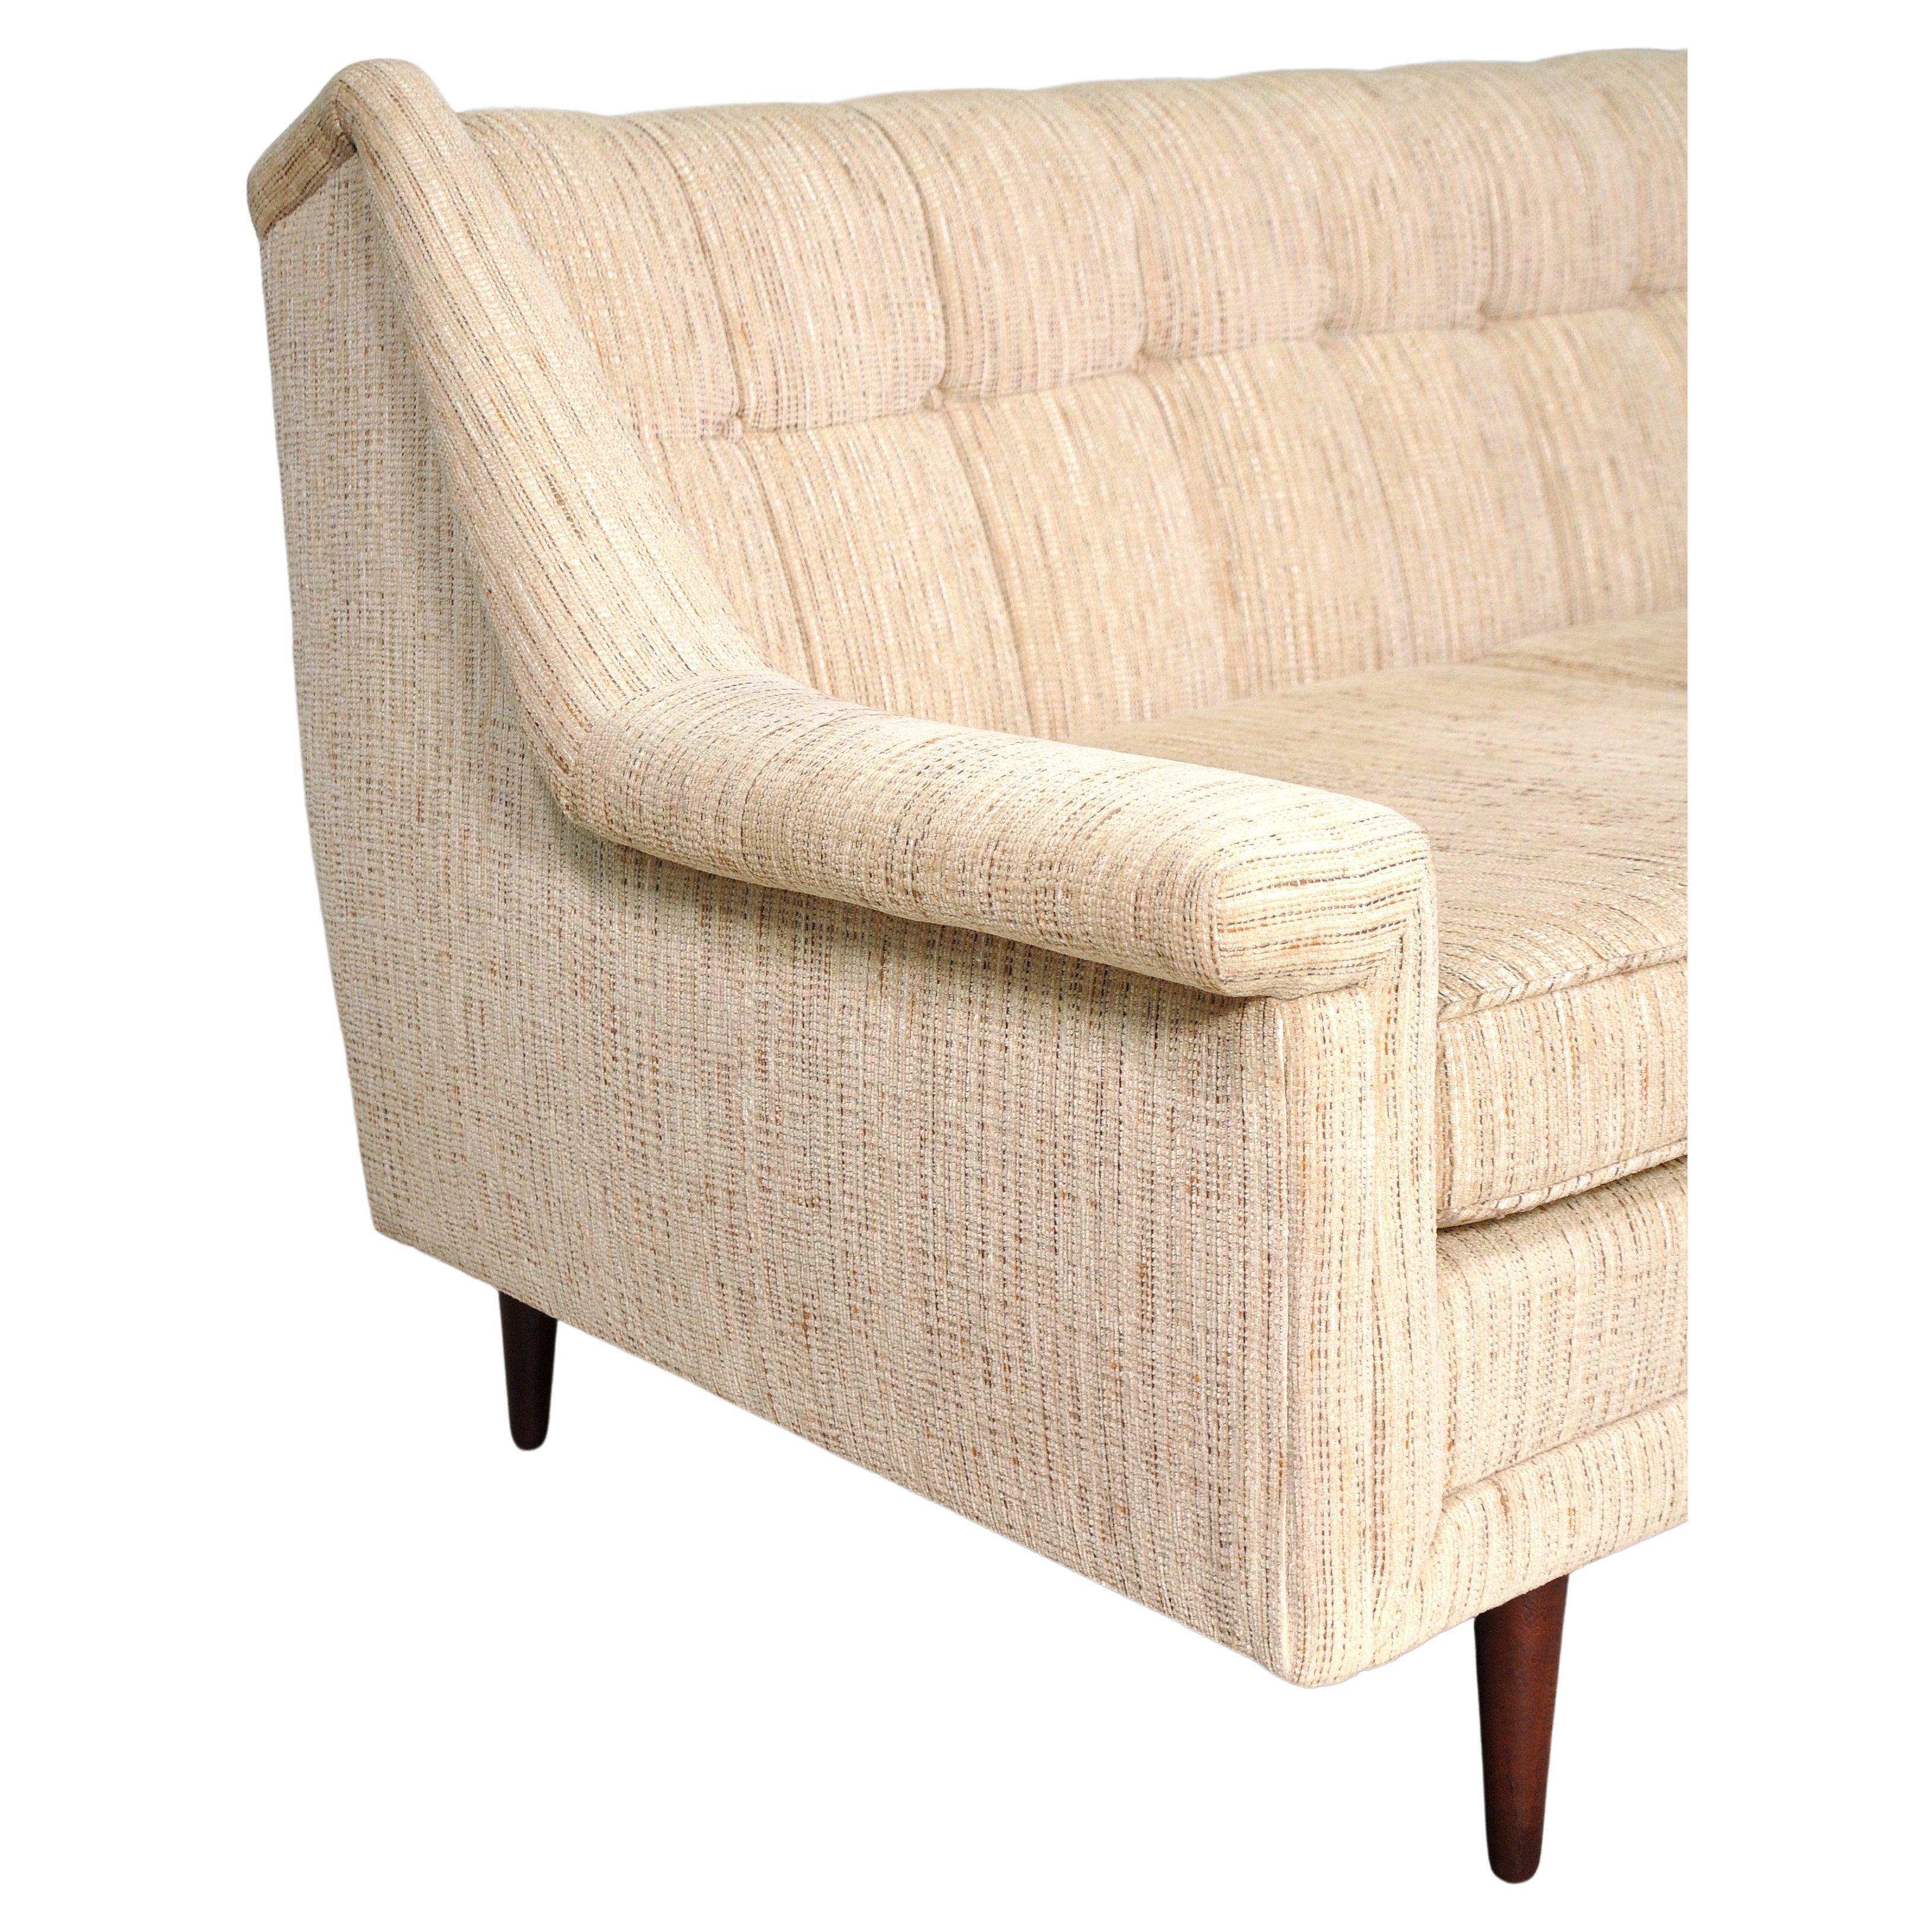 A neutral vintage Milo Baughman style cream couch with walnut legs, dating from the 1960s. The vintage three-seat sofa features the original pale beige chenille, a tufted channel back, loose cushions and round tapered legs. Very comfortable, neutral